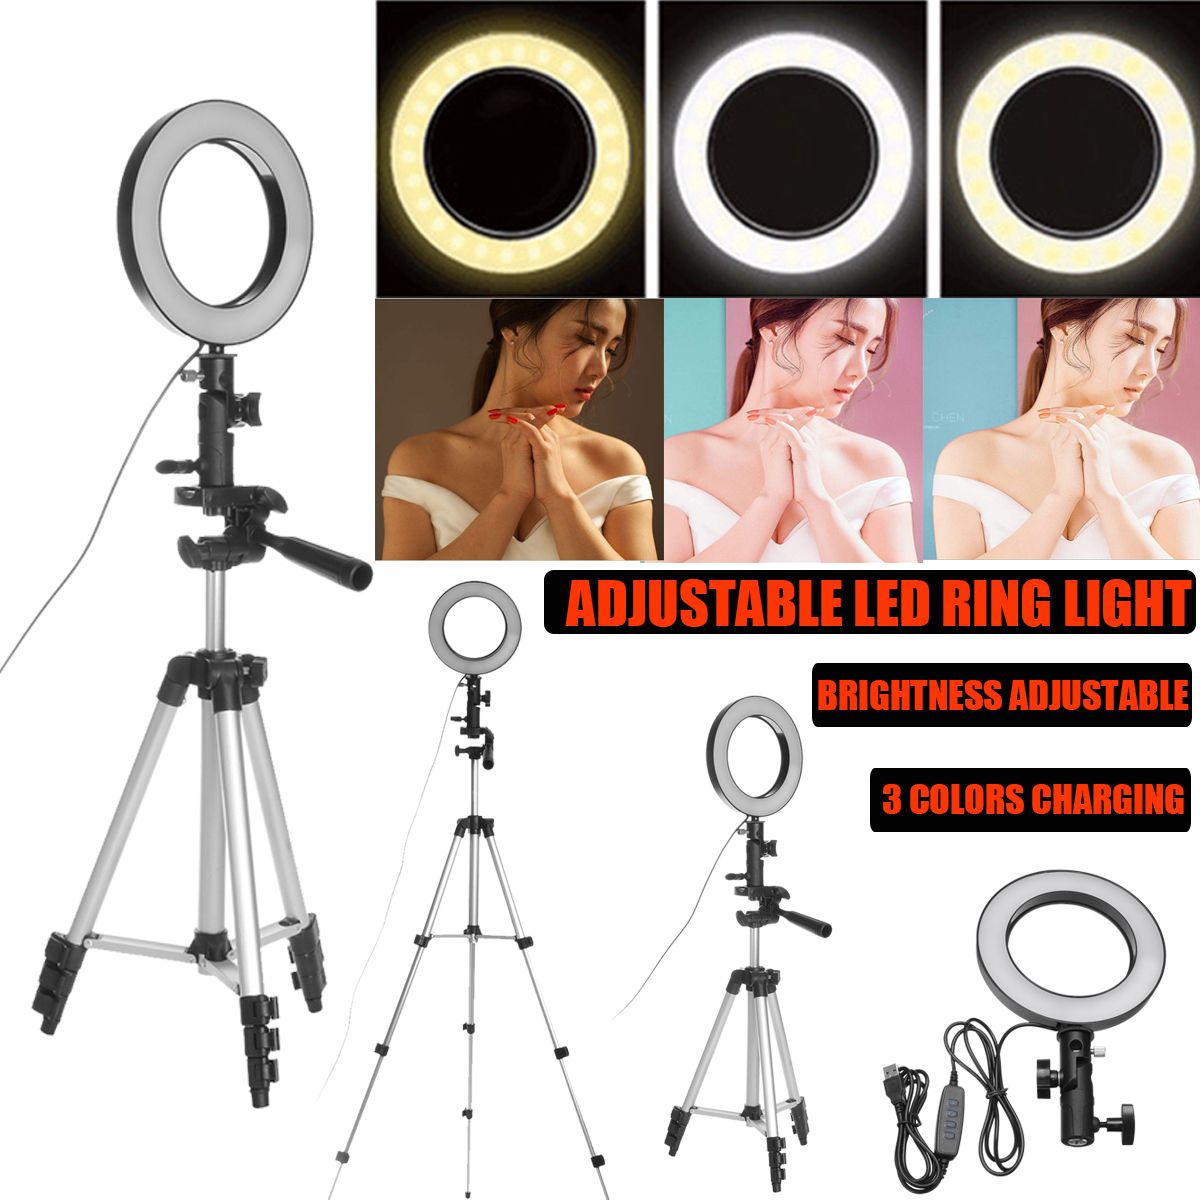 LED-Ring-Light-Photo-Studio-Camera-Light-Photography-Dimmable-Video-Light-for-Youtube-Makeup-Selfie--1639256